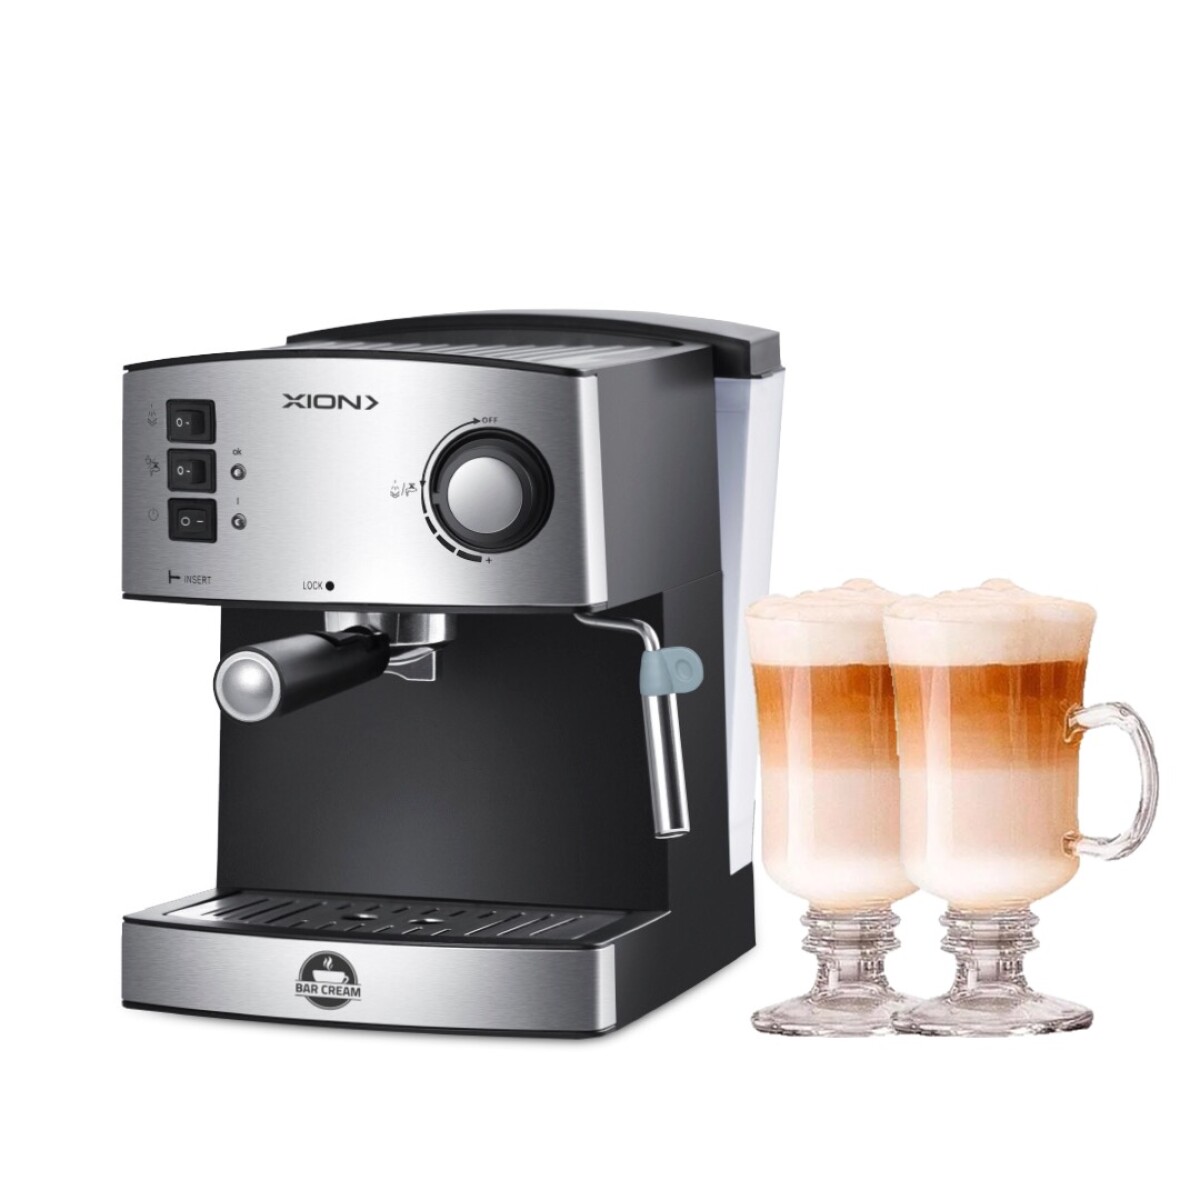 Cafetera Expresso y Capuccino Xion 850W 15 Bares 1.6LTS - 001 